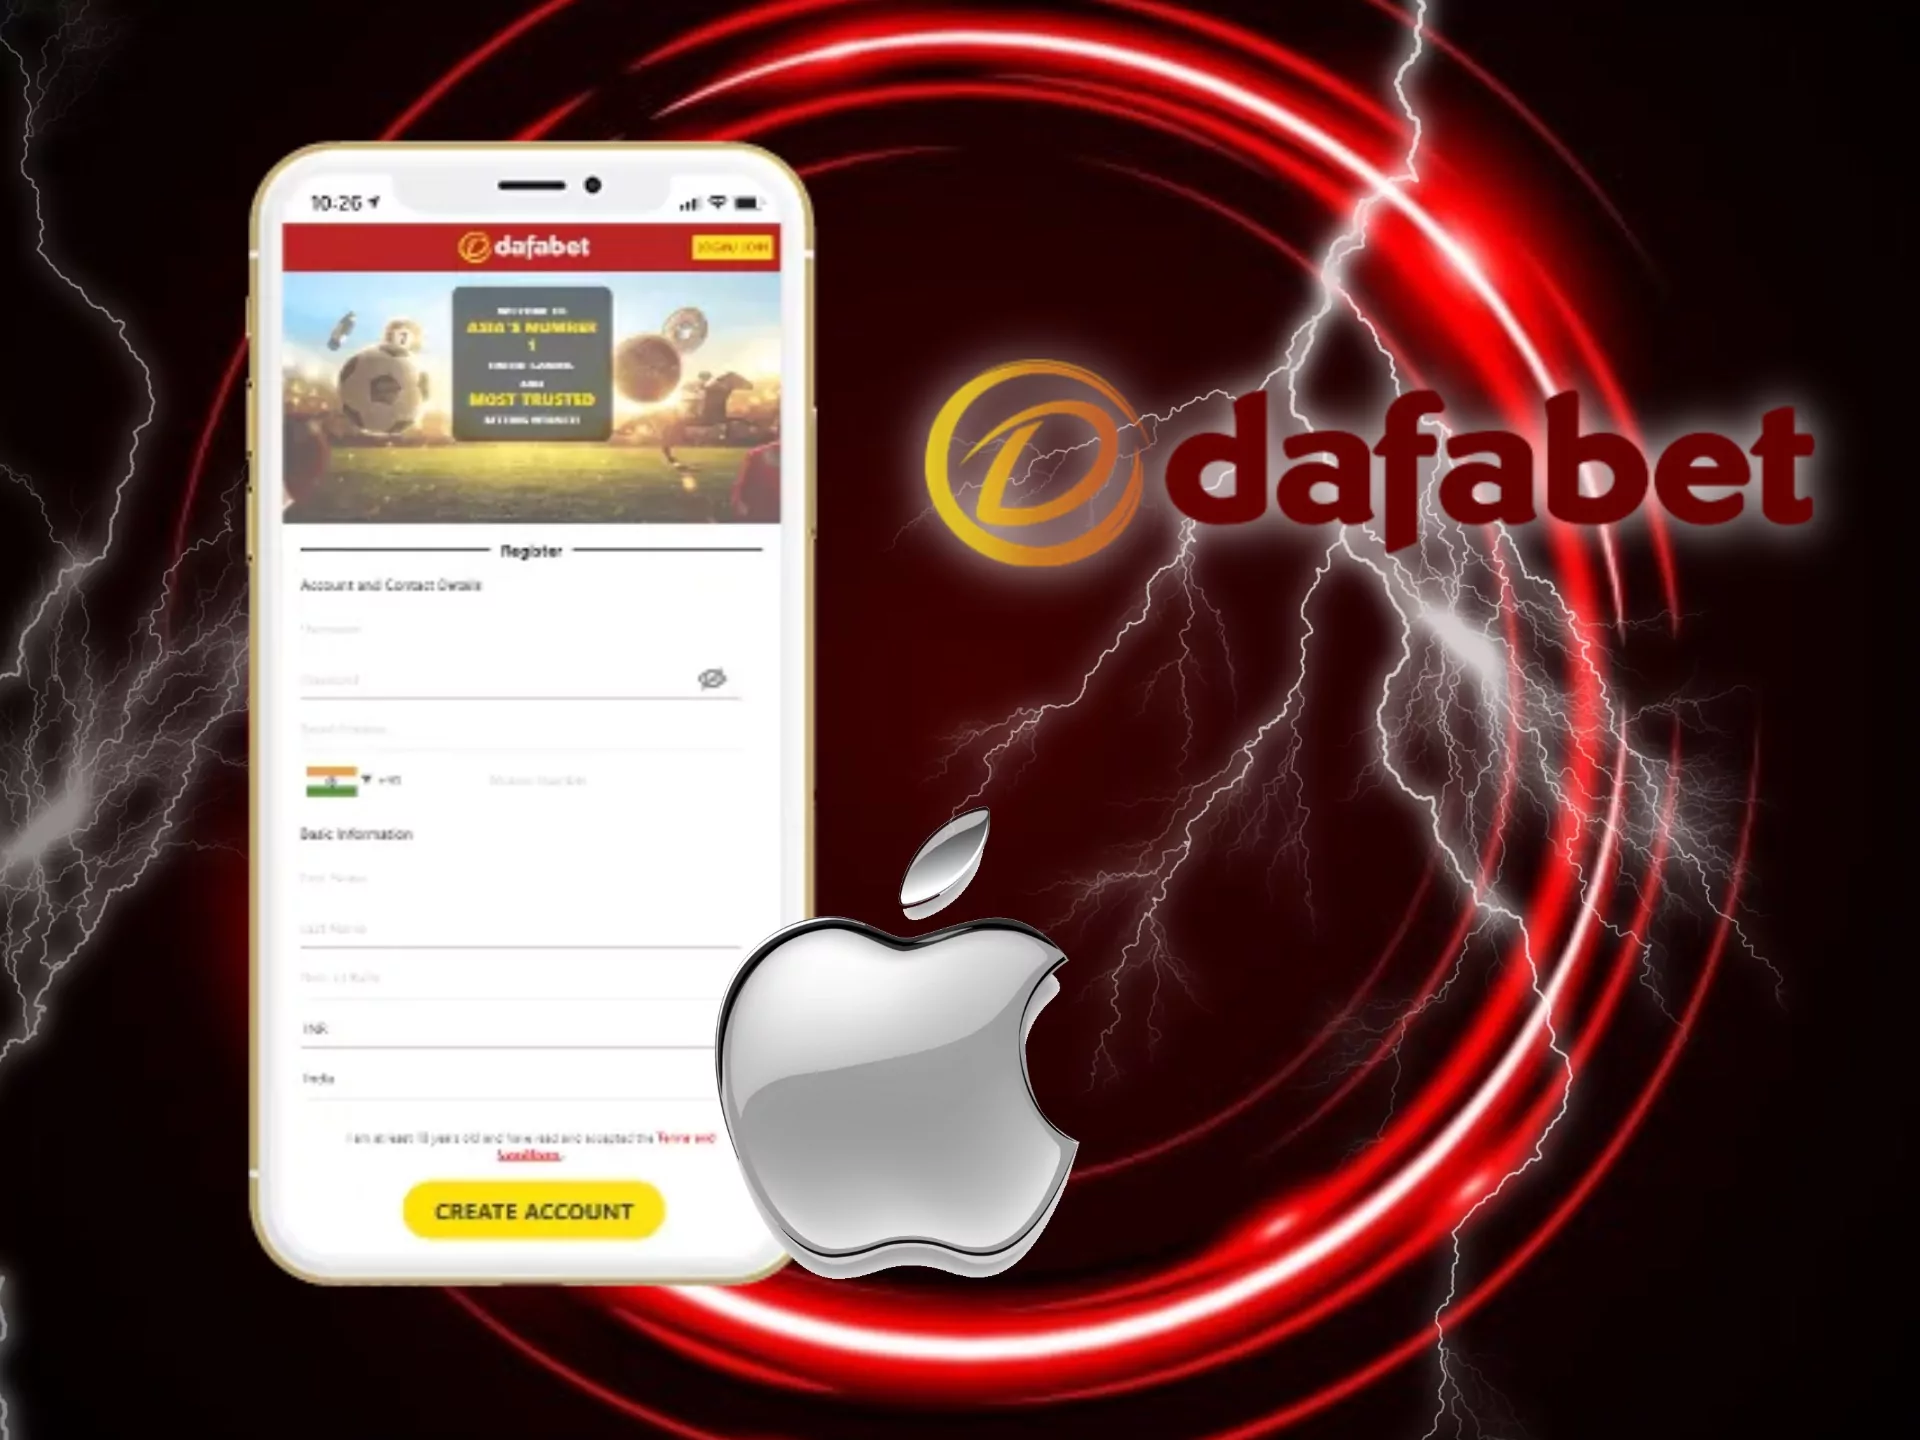 Dafabet app for iOS is a convenient way to place bets on cricket.